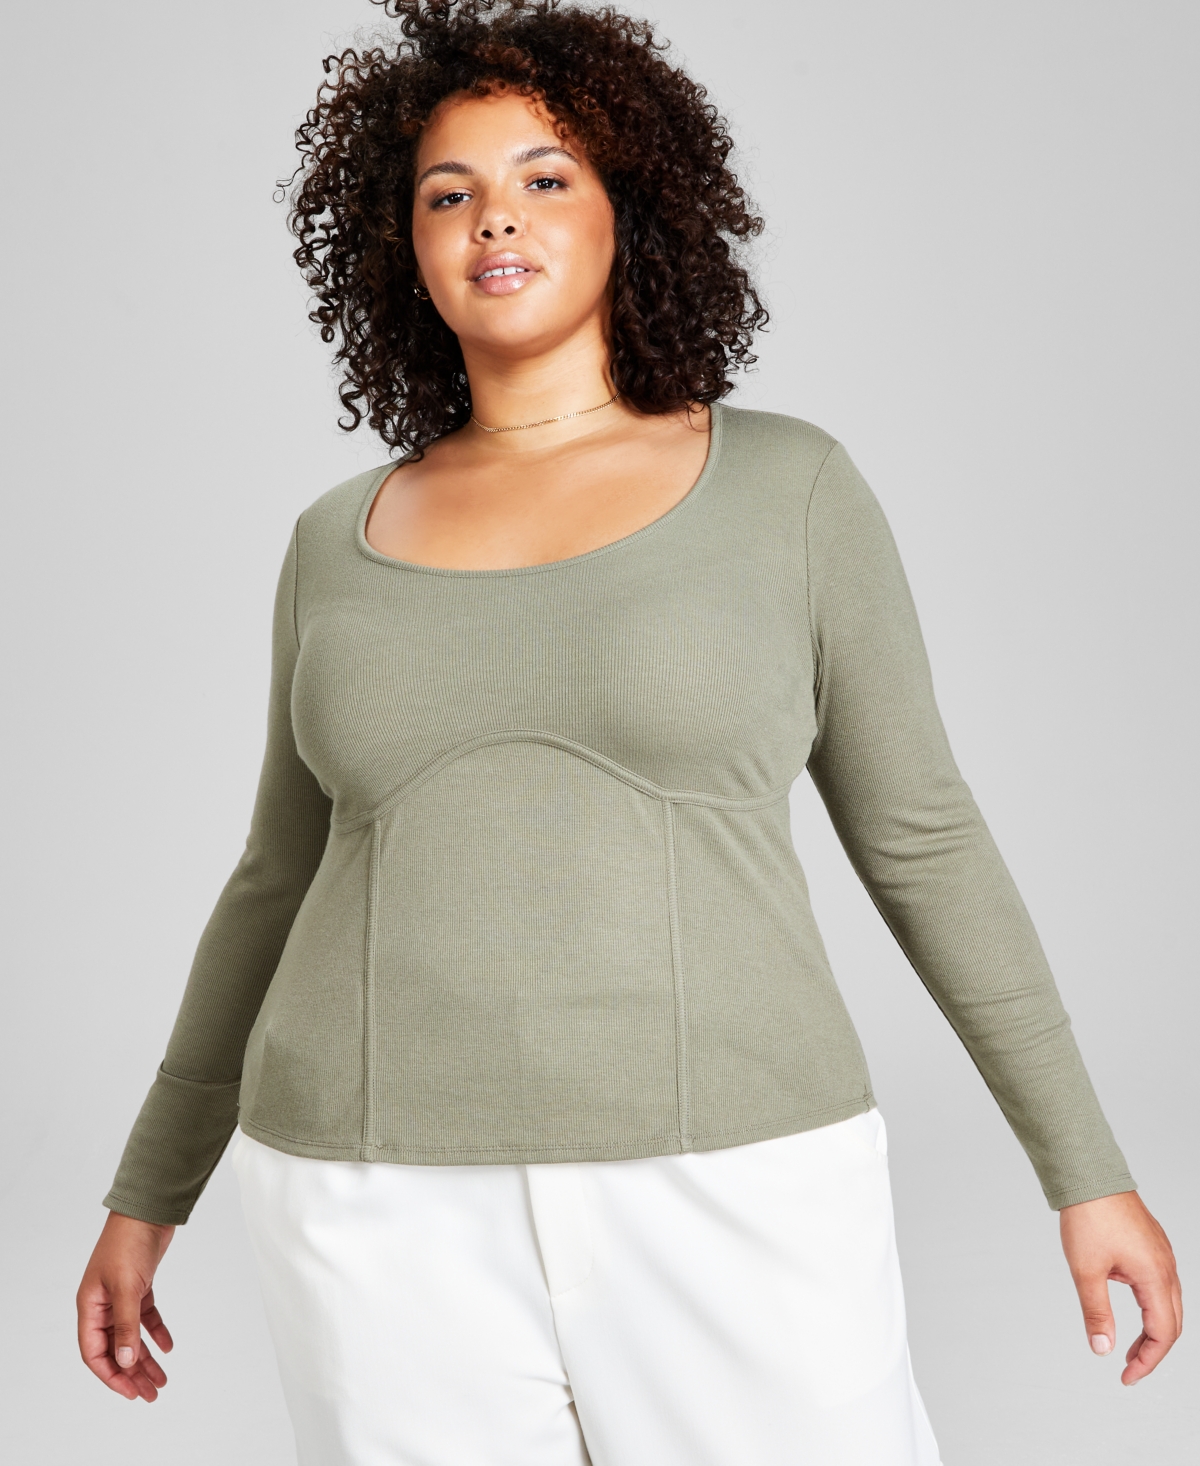 AND NOW THIS PLUS SIZE RIB-KNIT CORSET TOP